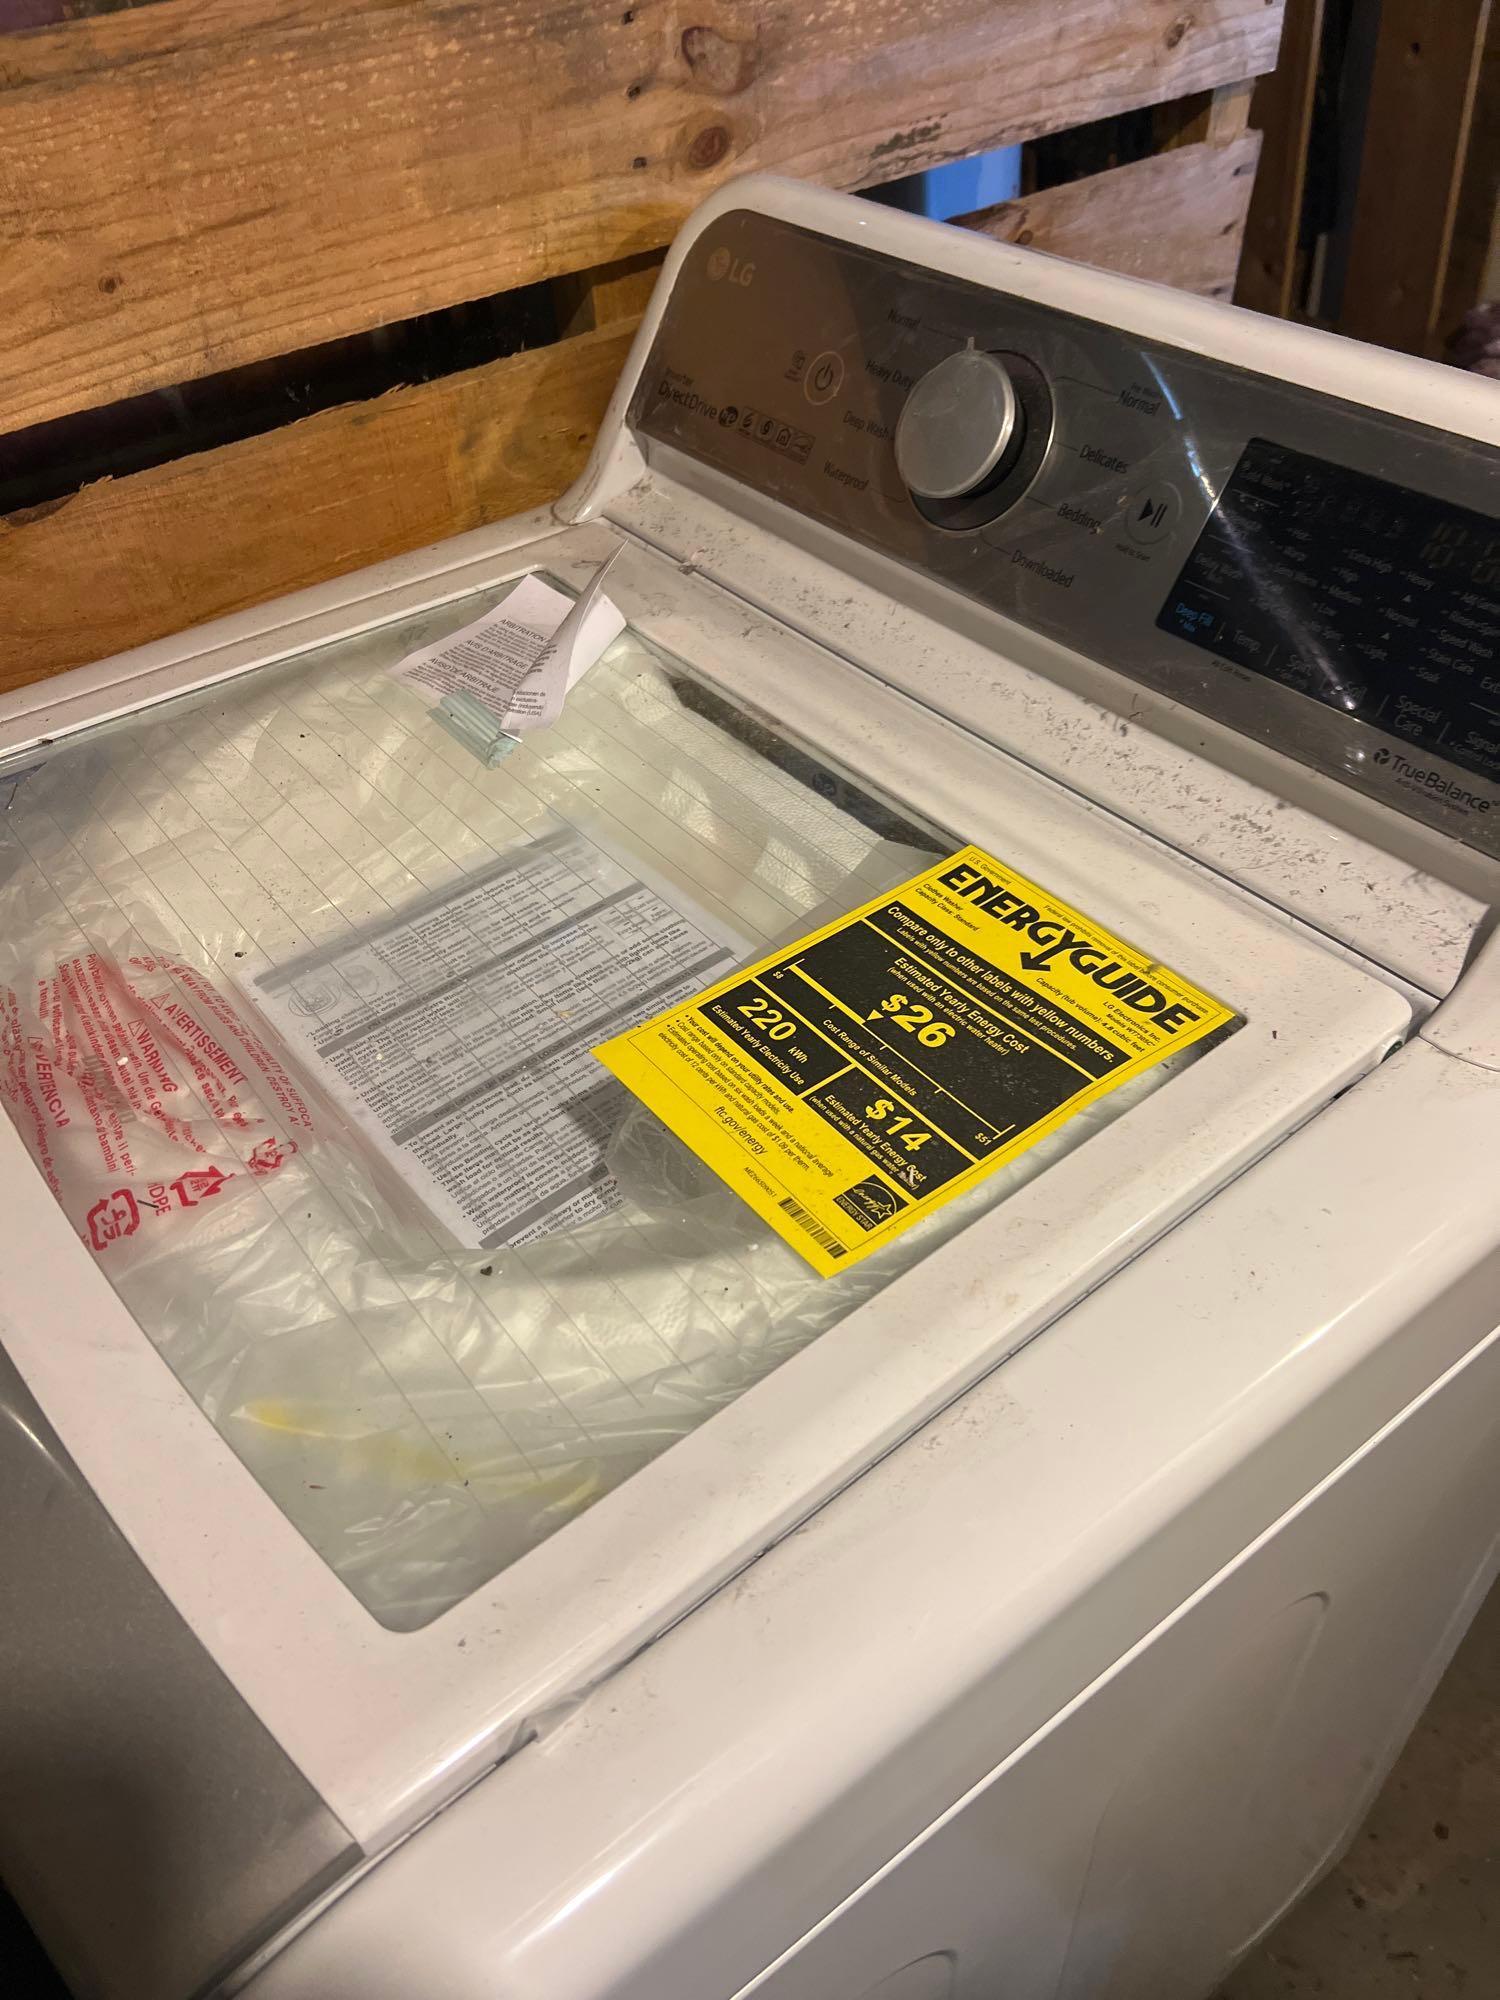 NICE LG washer and dryer - basement. READ DESCRIPTION